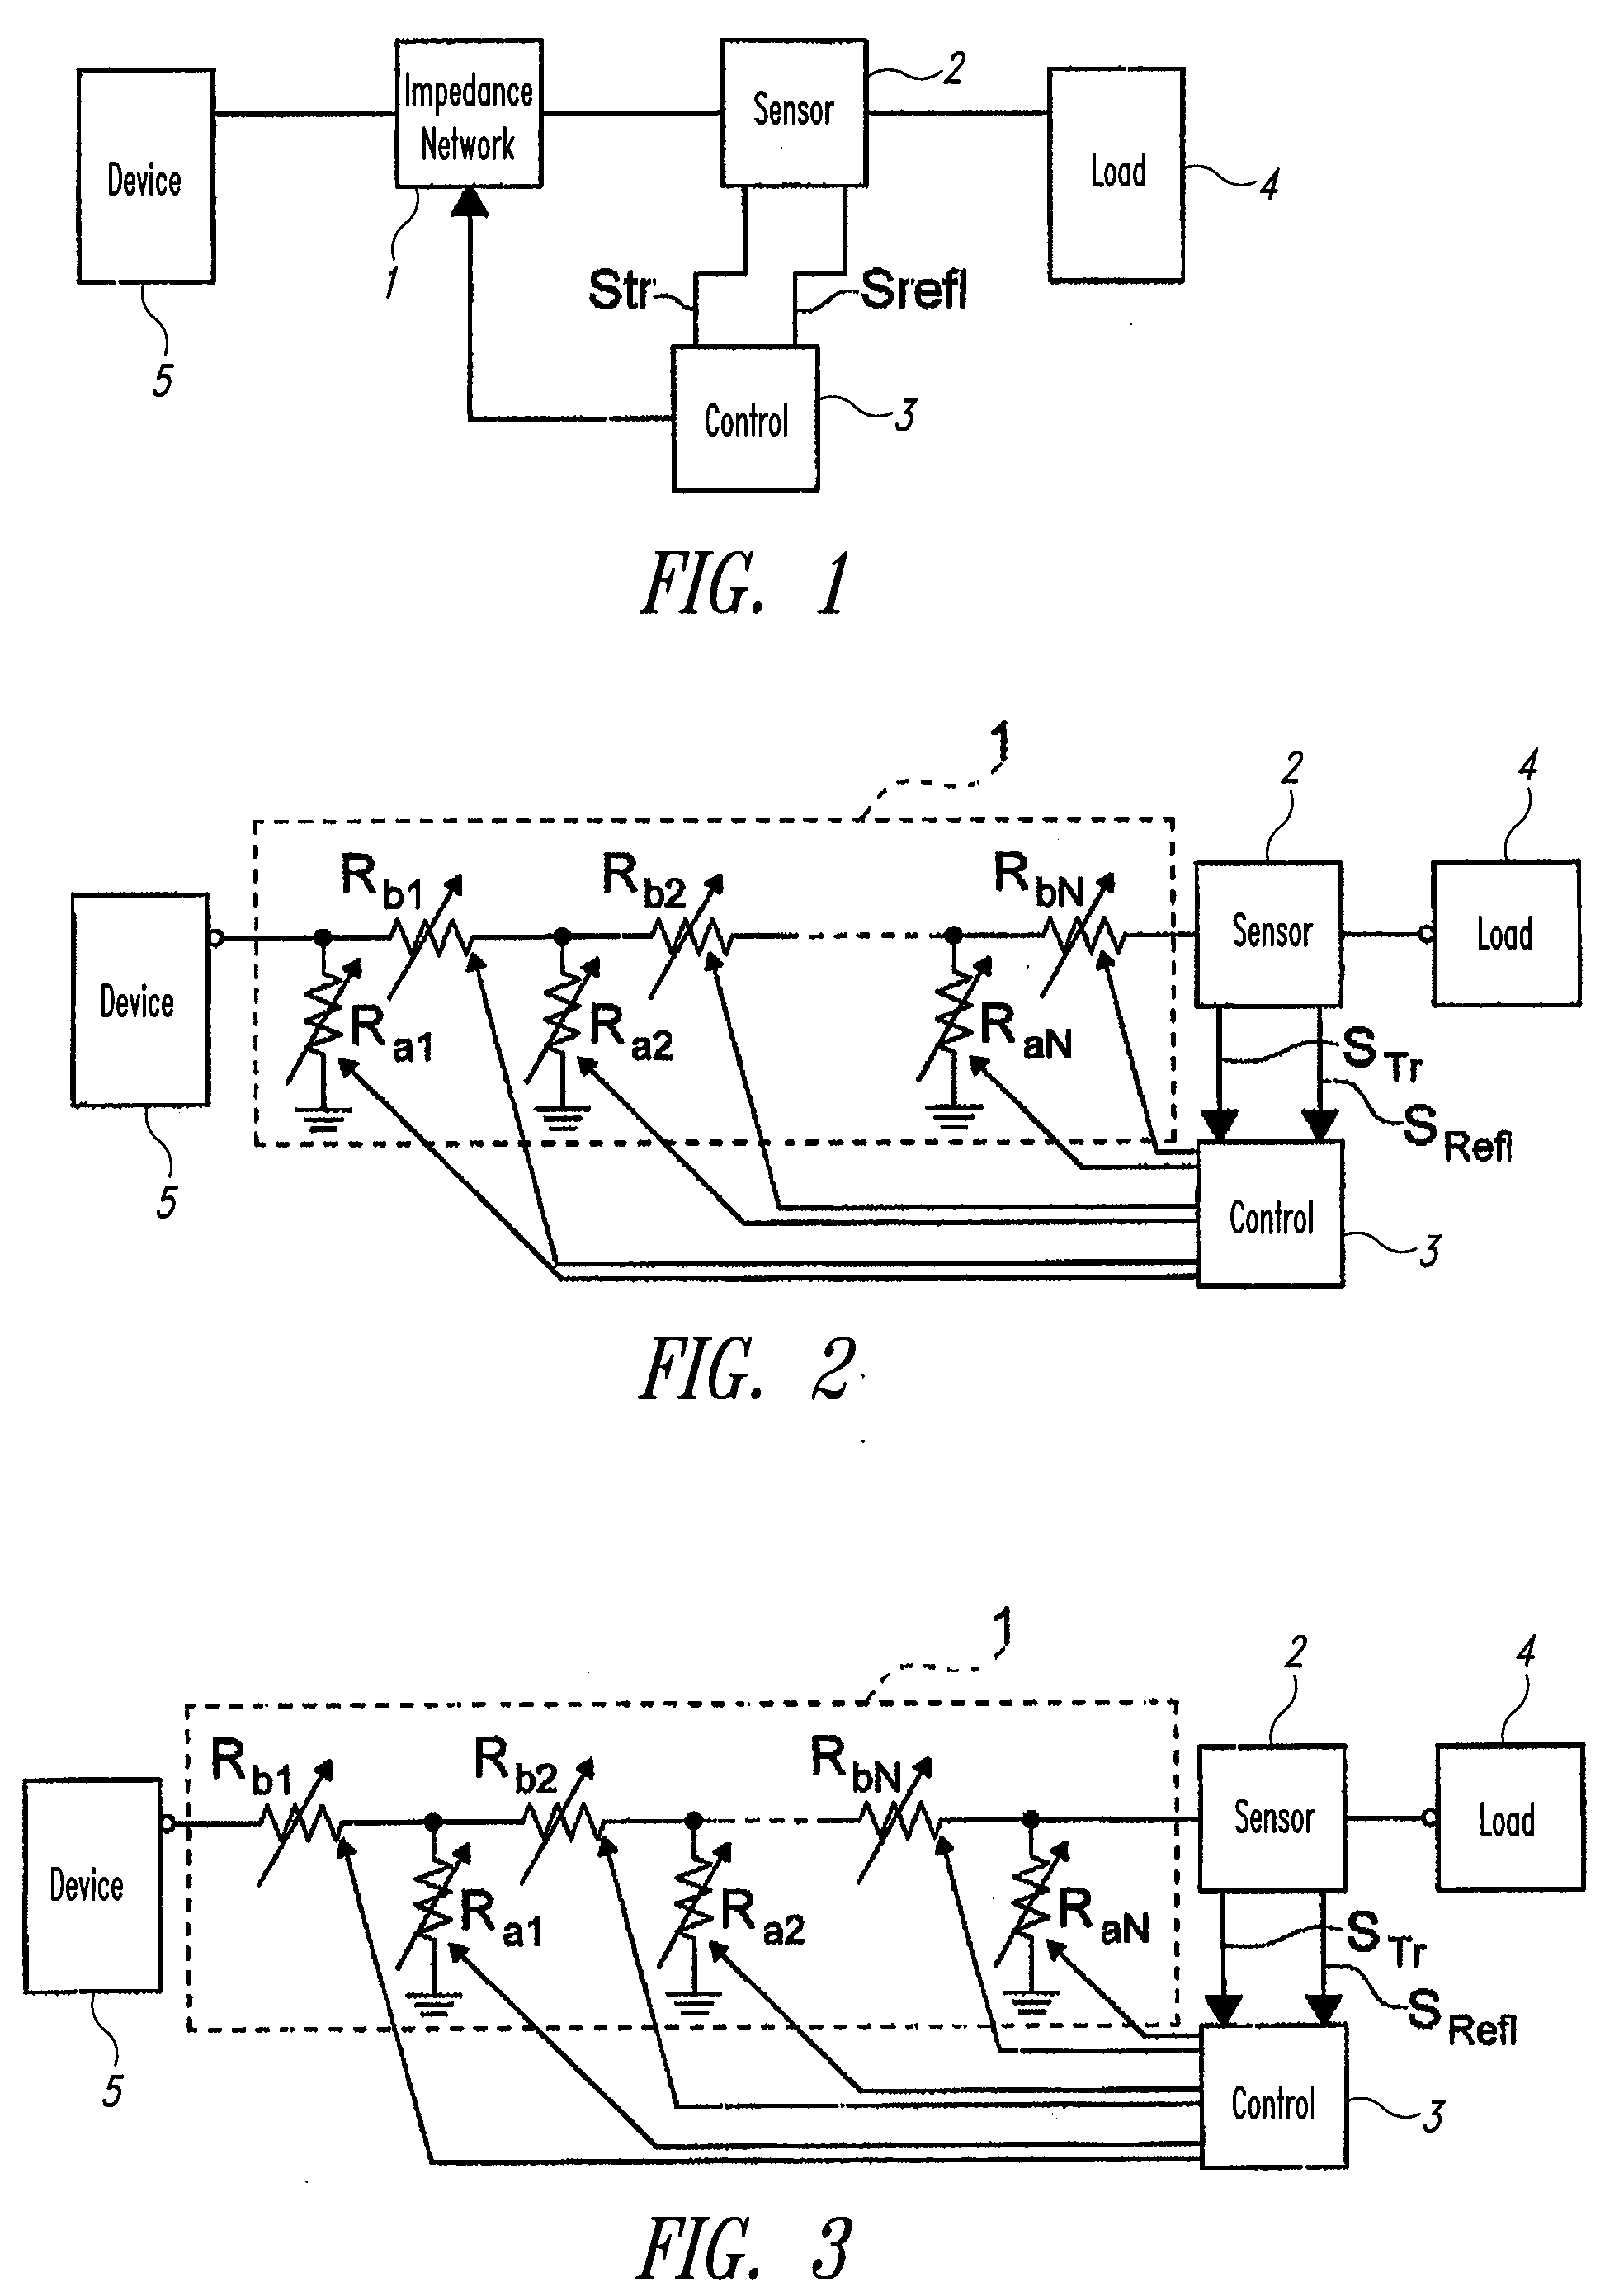 Circuit for matching the load impedance of an electronic device